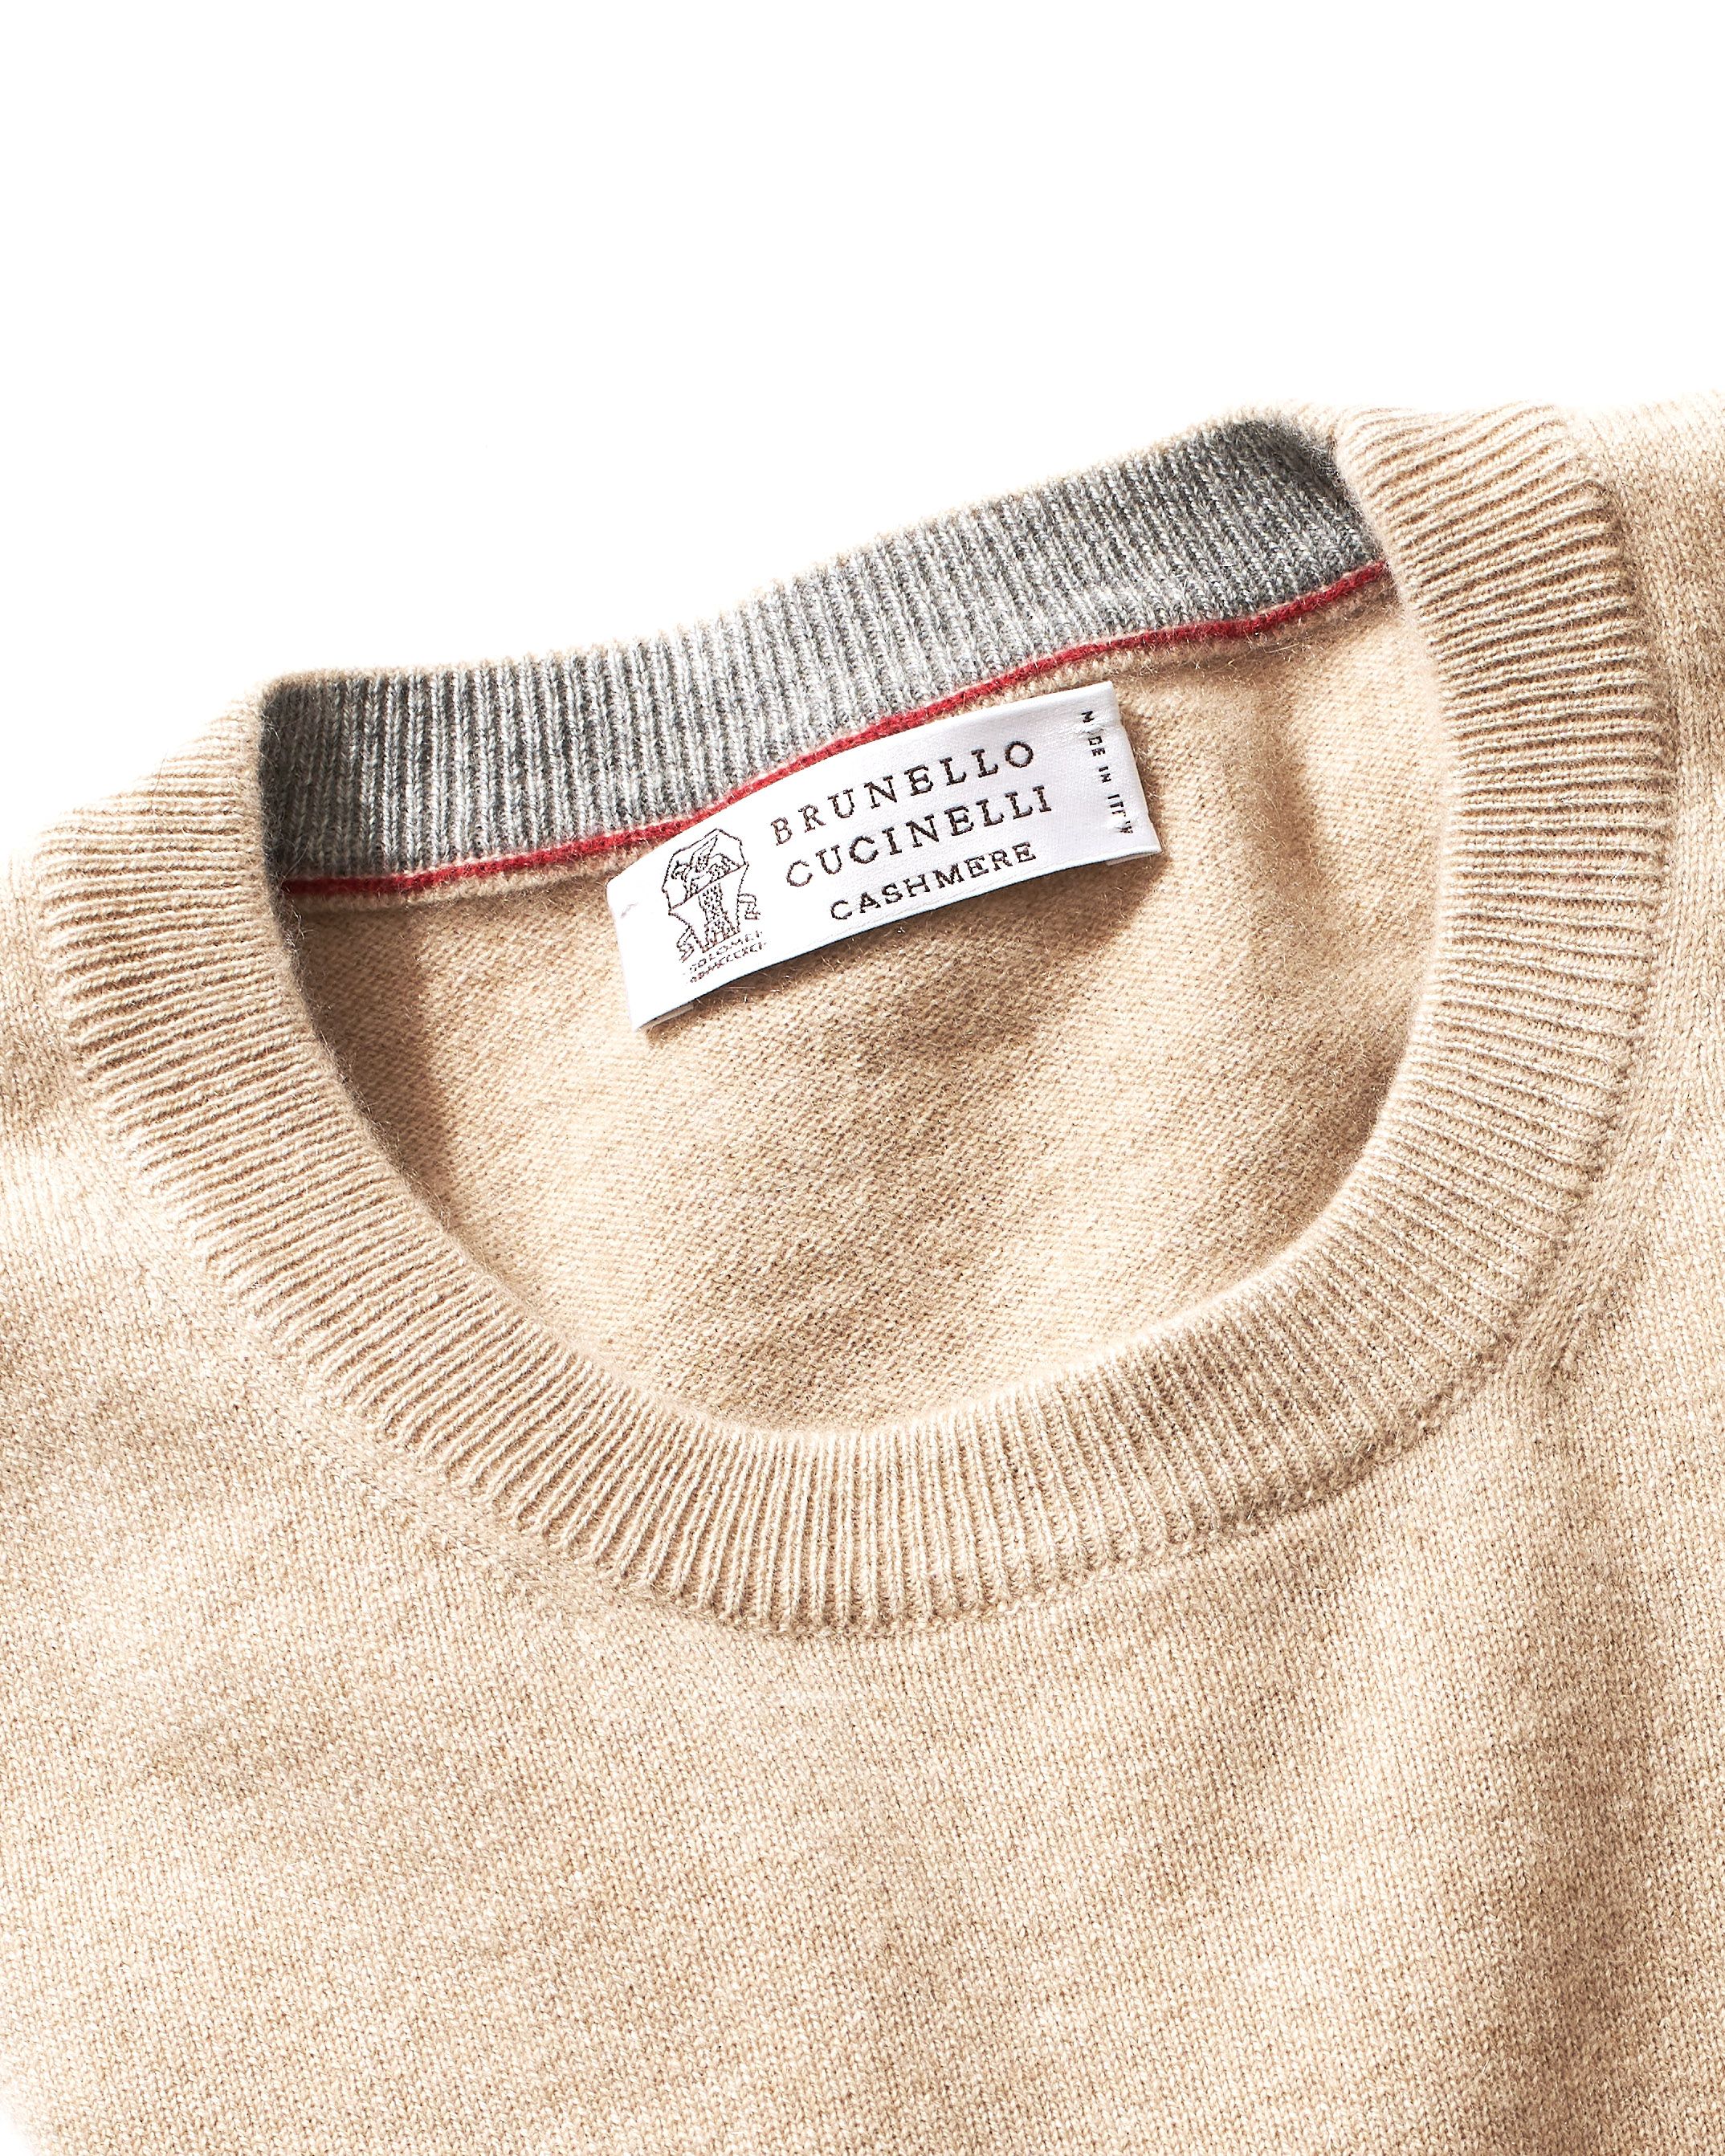 Why Brunello Cucinelli Is Worth the Price (Hint: It's Not Just the  Cashmere)